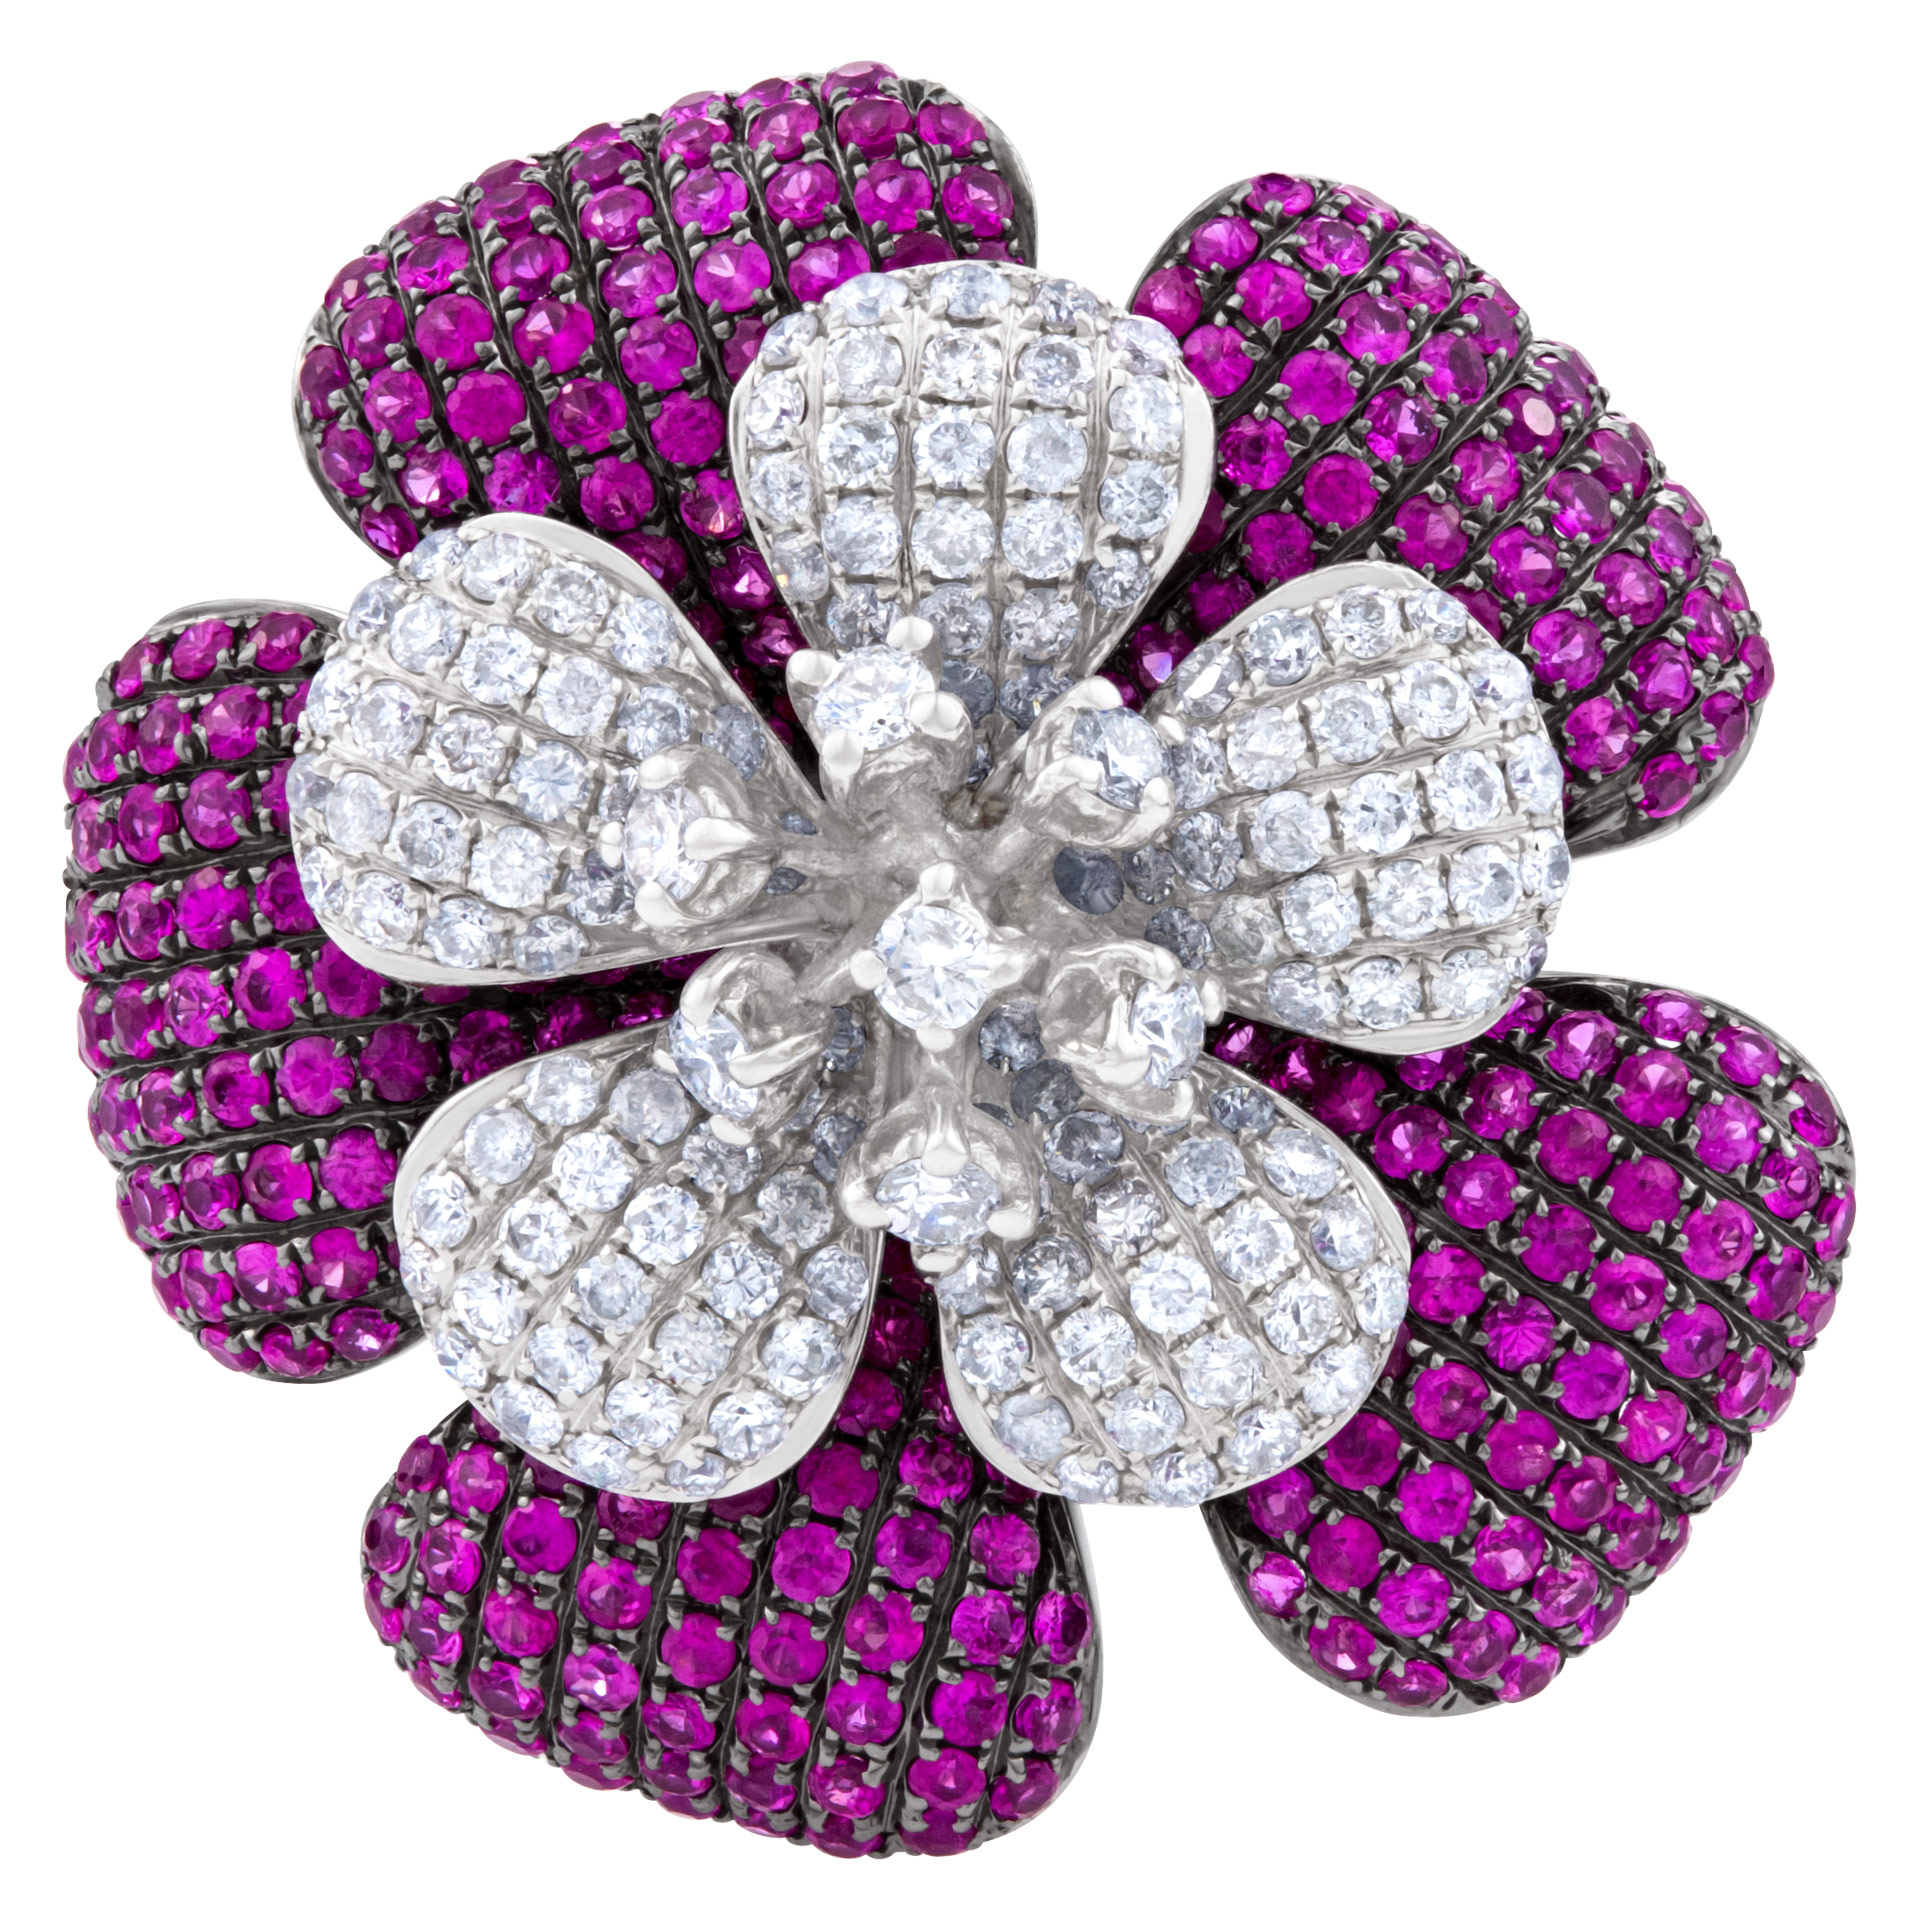 Ladies magnificant ruby and diamond flower ring set in 18k white gold